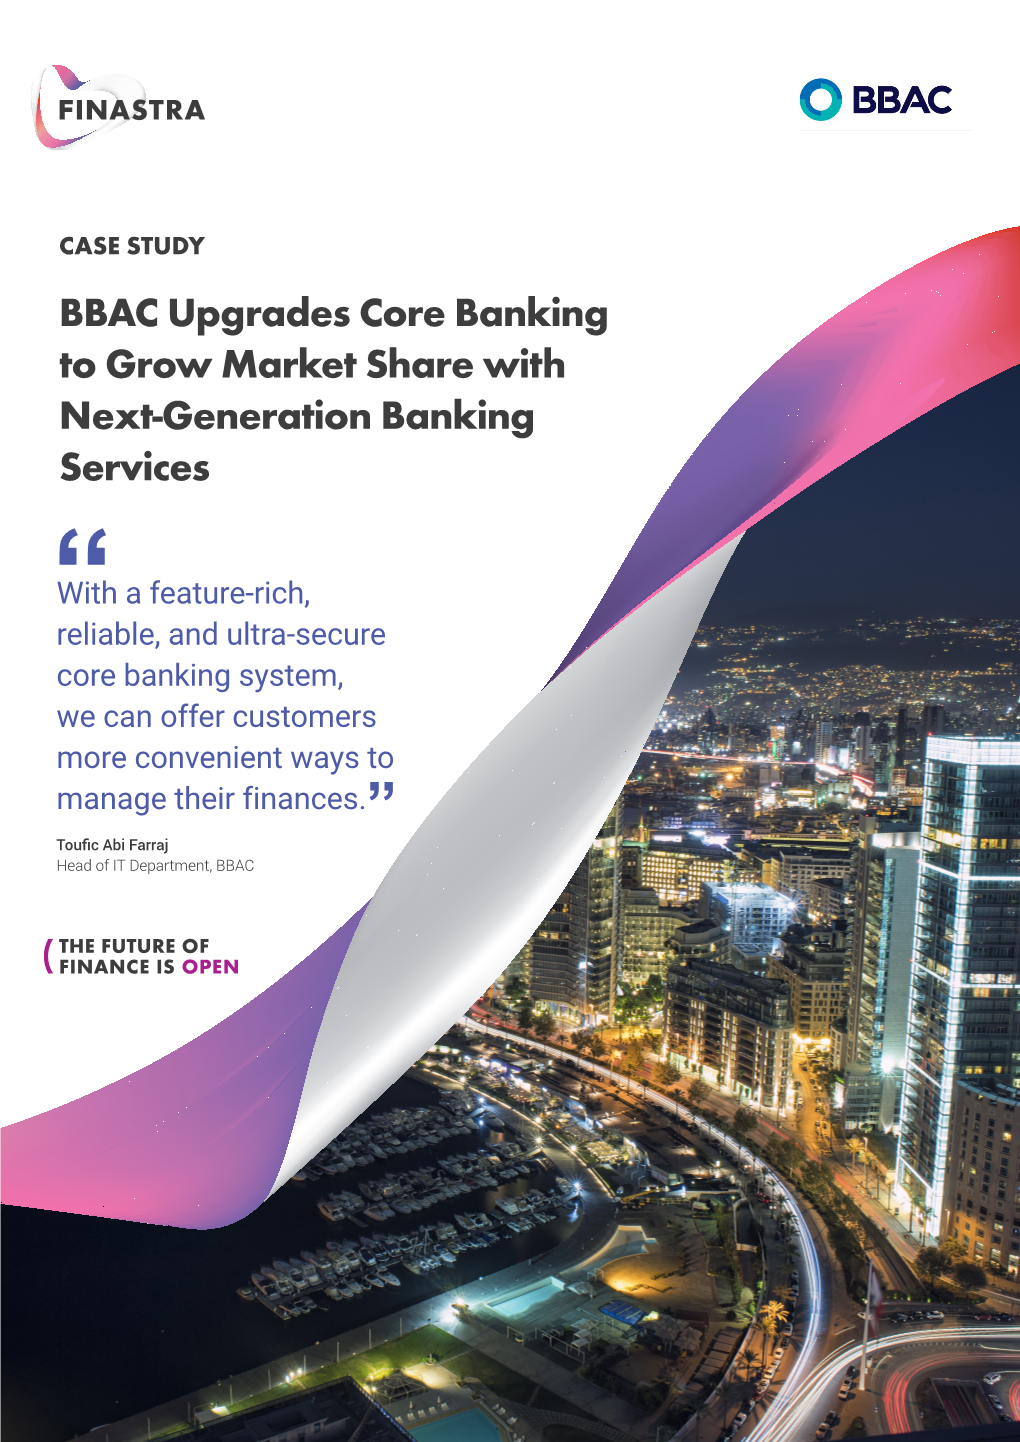 BBAC Upgrades Core Banking to Grow Market Share with Next-Generation Banking Services